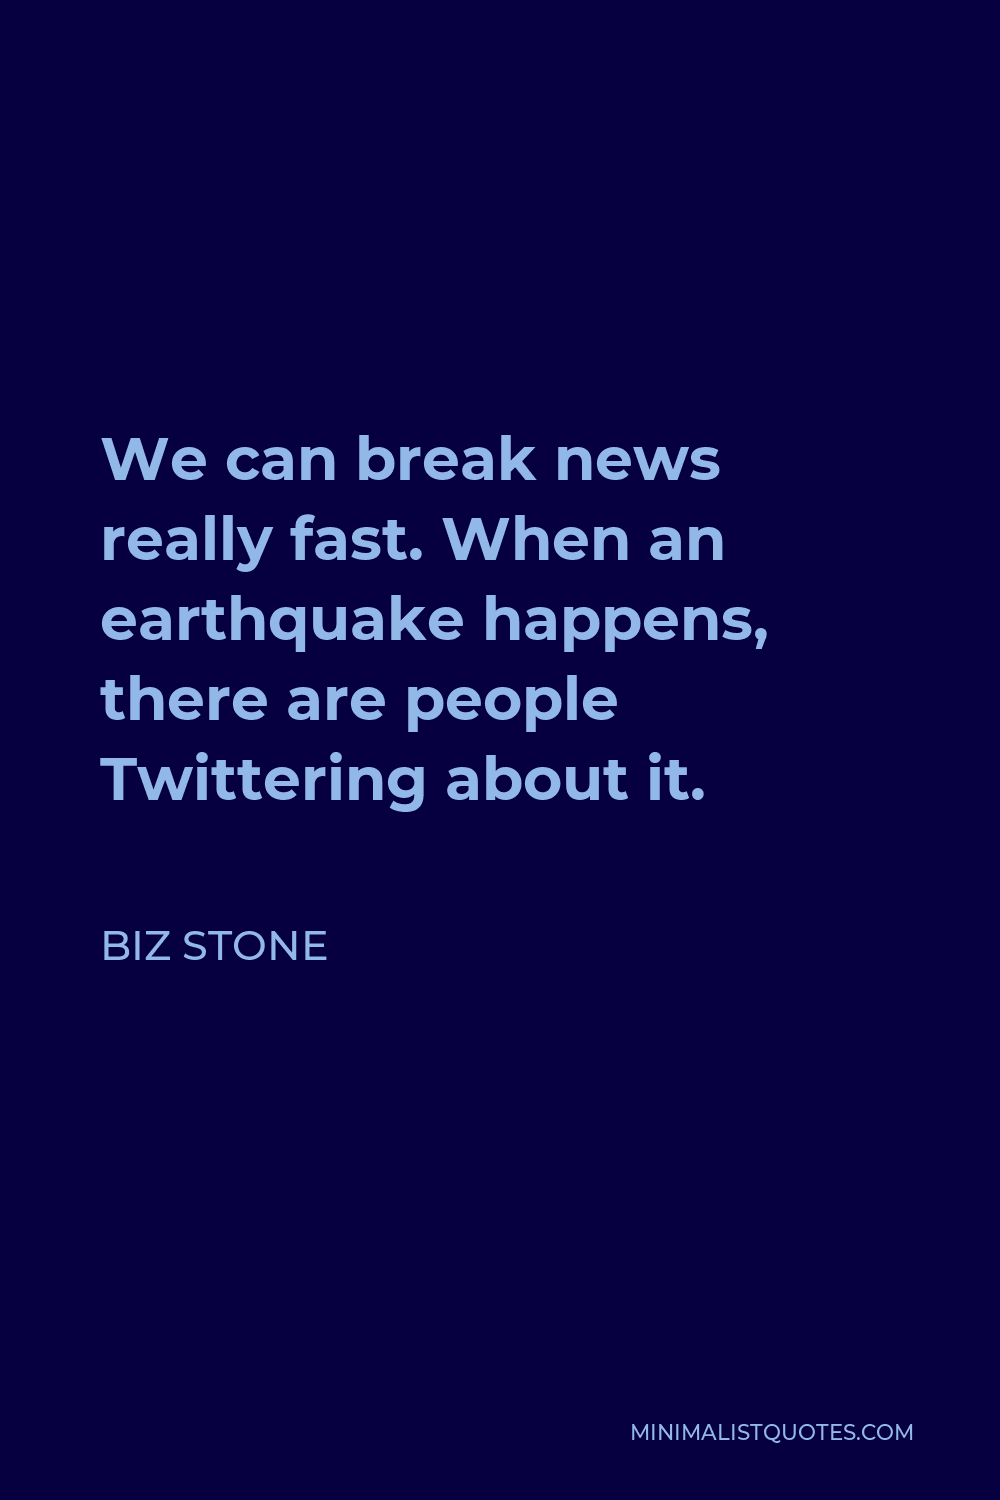 Biz Stone Quote - We can break news really fast. When an earthquake happens, there are people Twittering about it.